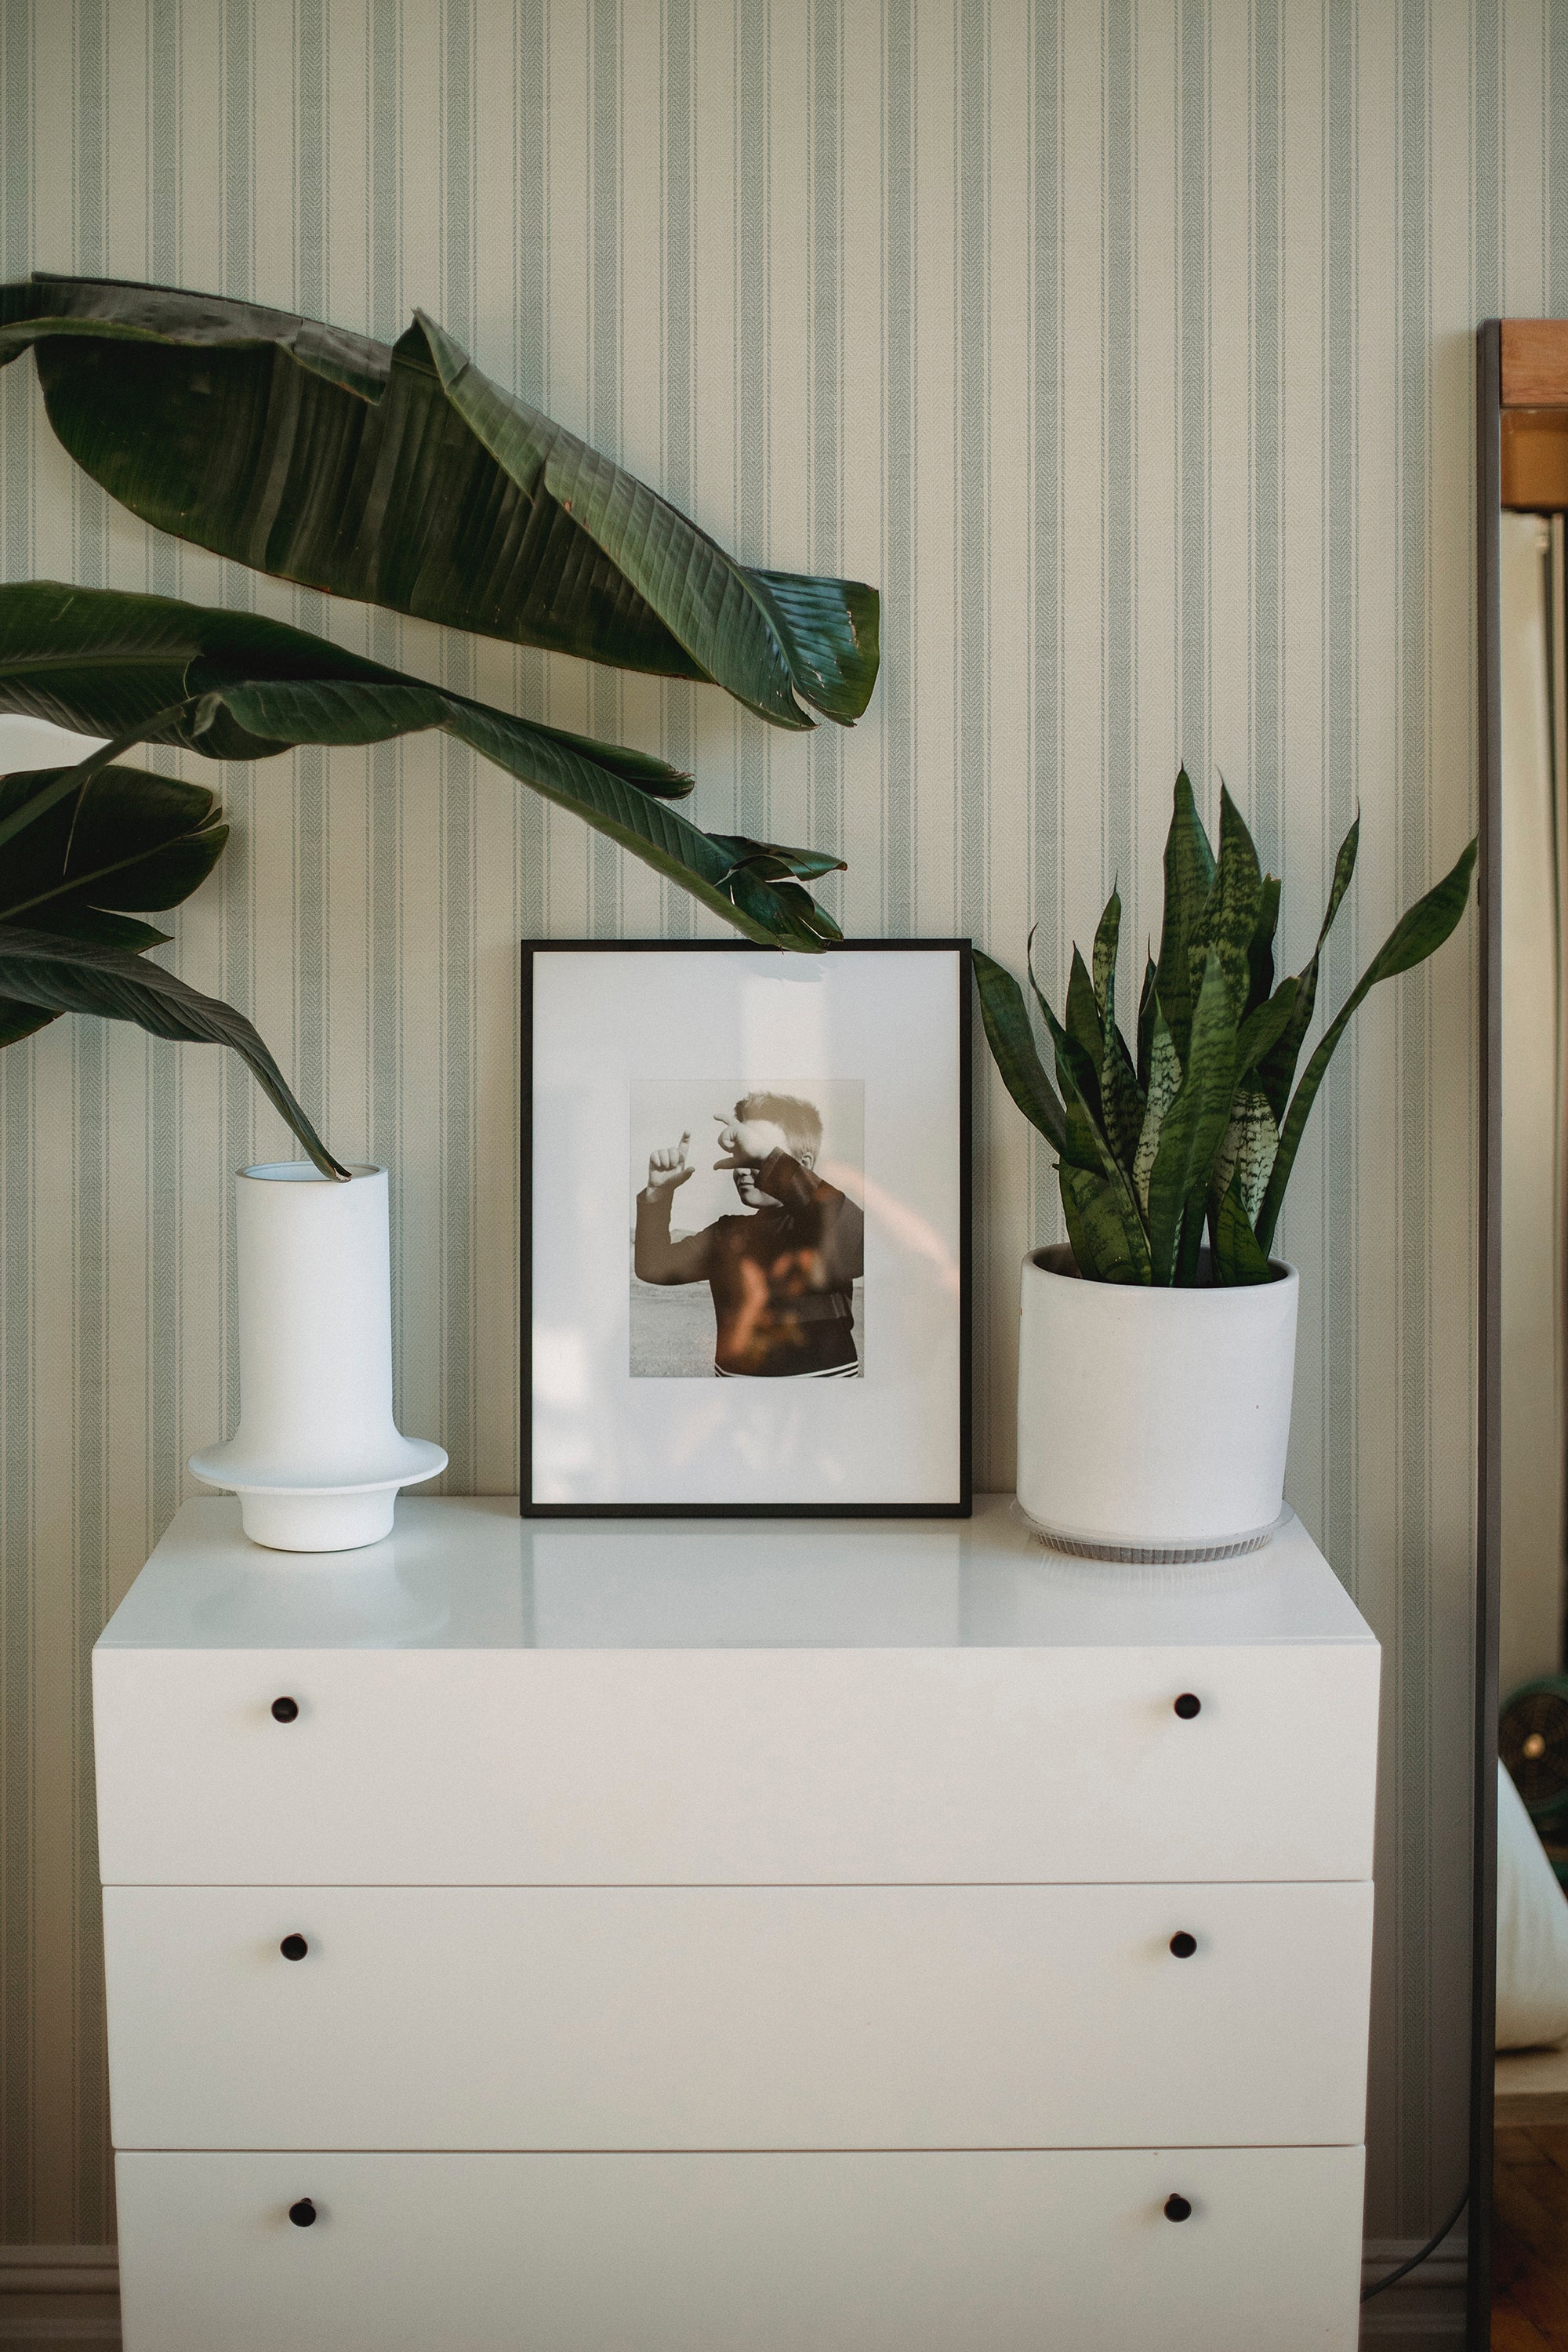  A serene bedroom setup featuring a white dresser topped with a framed black and white photo of a playful moment at the beach. A large green plant in a white pot sits beside the frame, enhancing the natural ambiance. The room is characterized by soft, striped green wallpaper, adding a subtle texture to the calm, well-organized space.